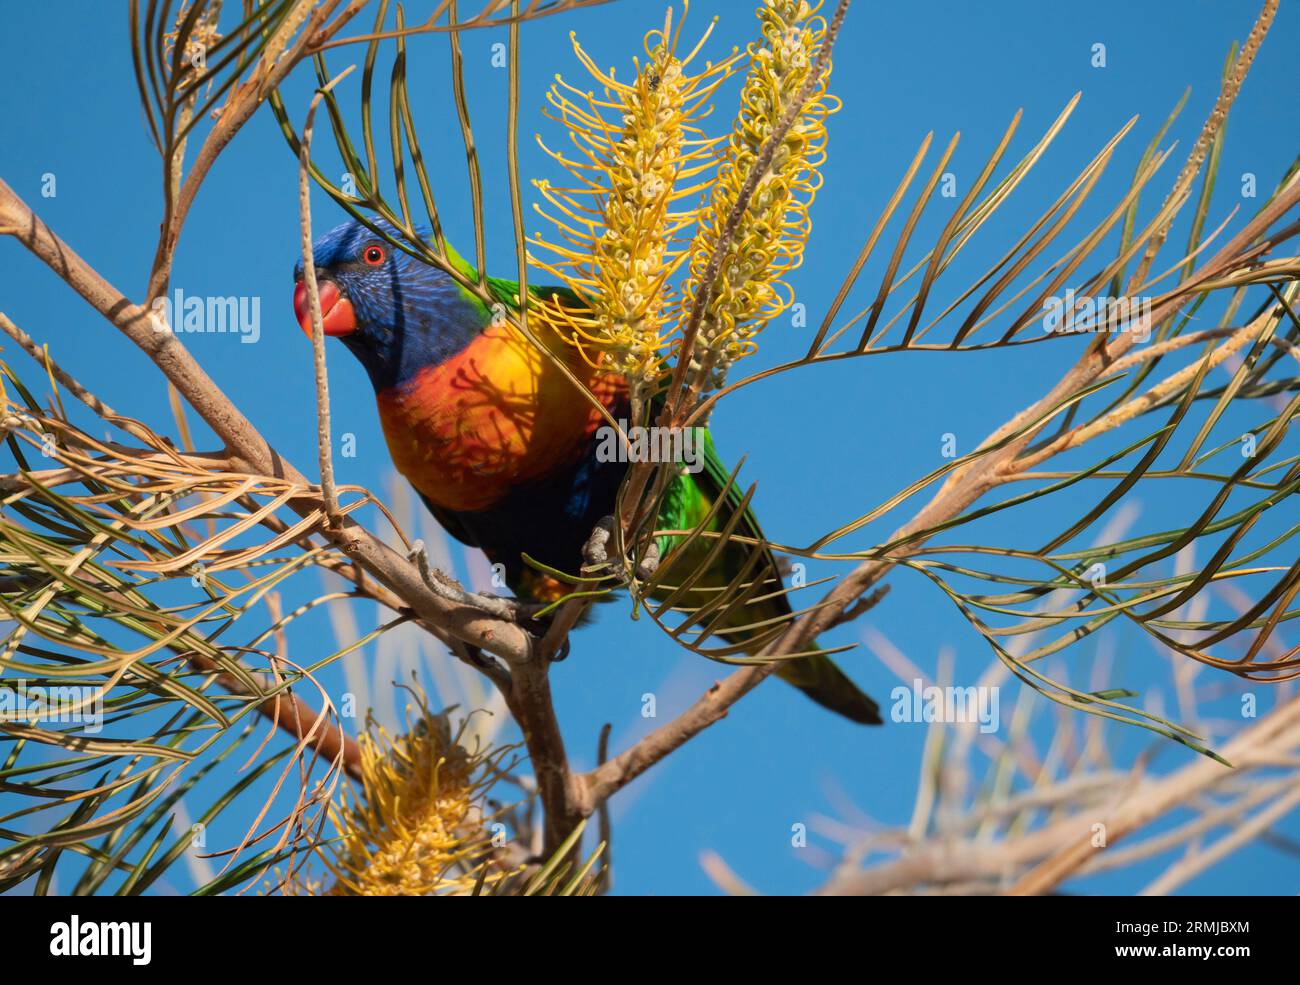 A colourful Rainbow Lorikeet, Trichoglossus moluccanus, feeding on a banksia tree flower in outback norther Queensland, Australia Stock Photo